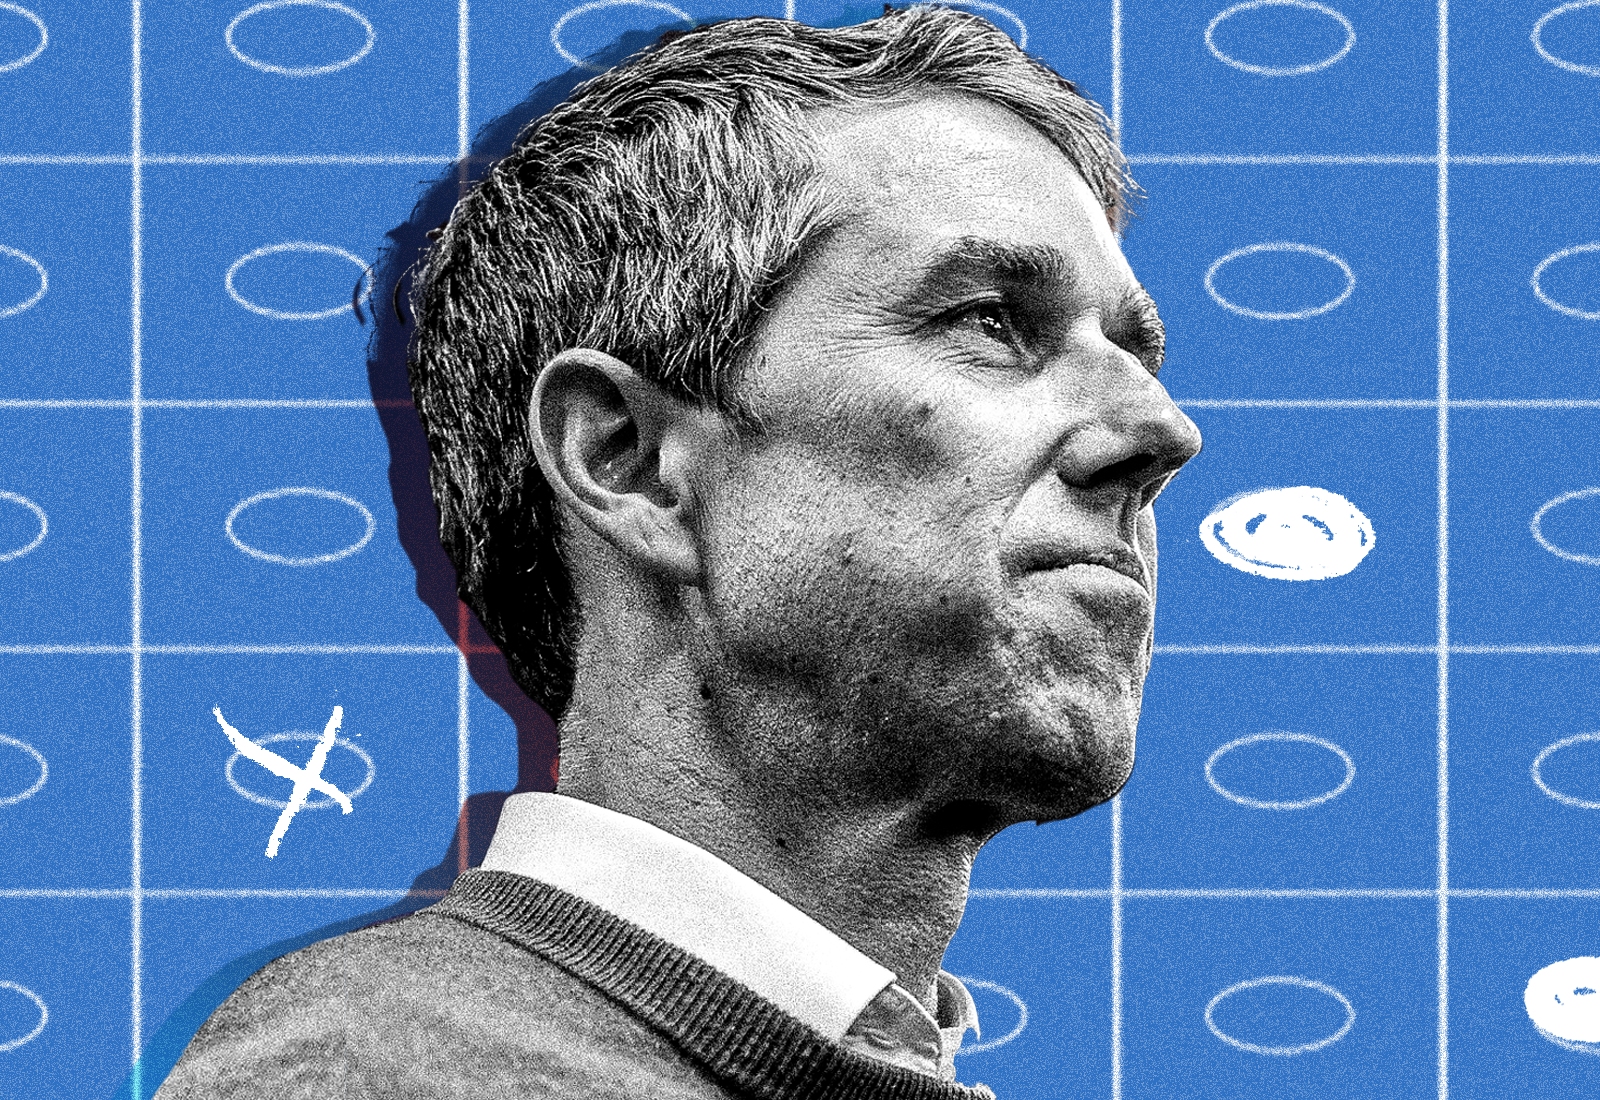 A close-up of Beto O&#x27;Rourke&#x27;s face in front of an illustration of ballot bubbles